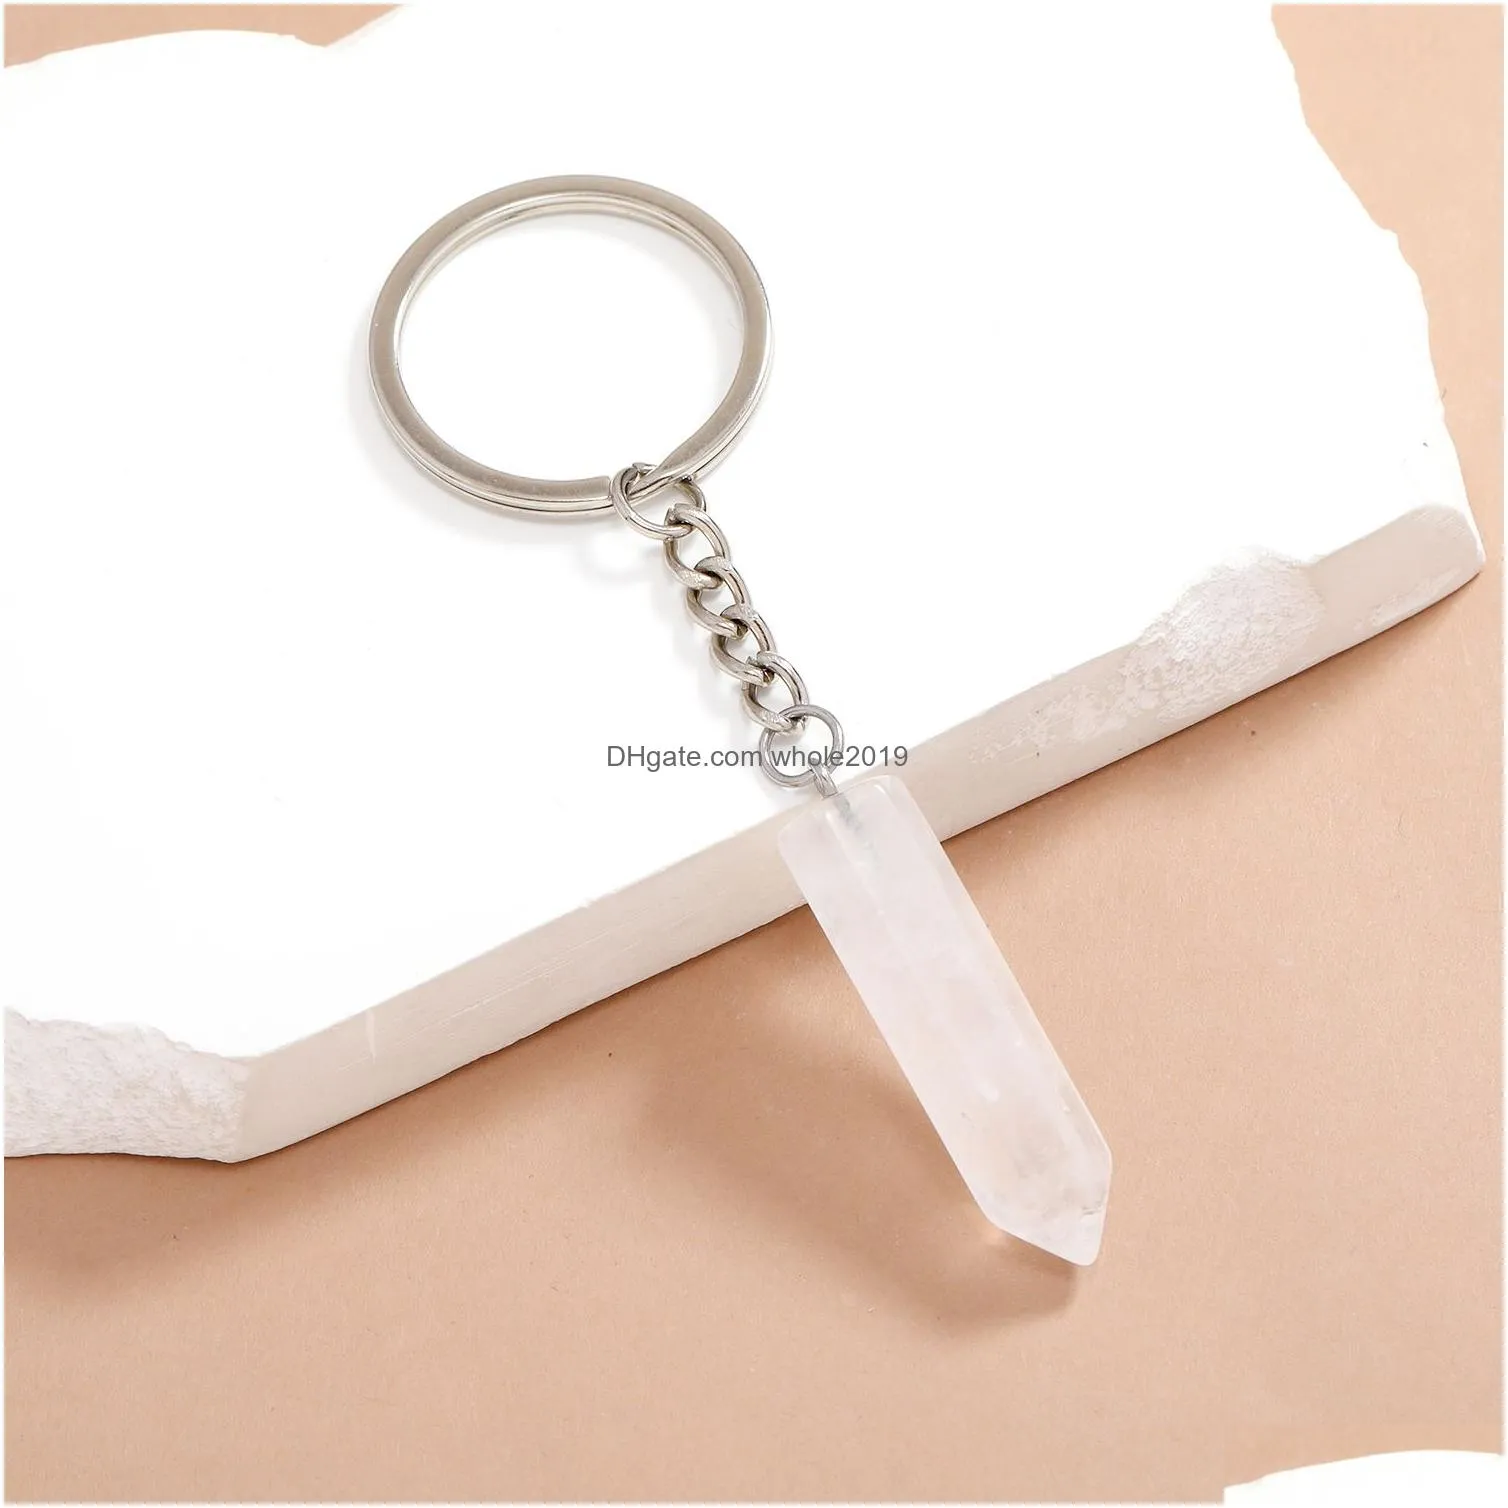 hexagonal column key ring natural stone opal crystal gem keychain for women men personality accessories